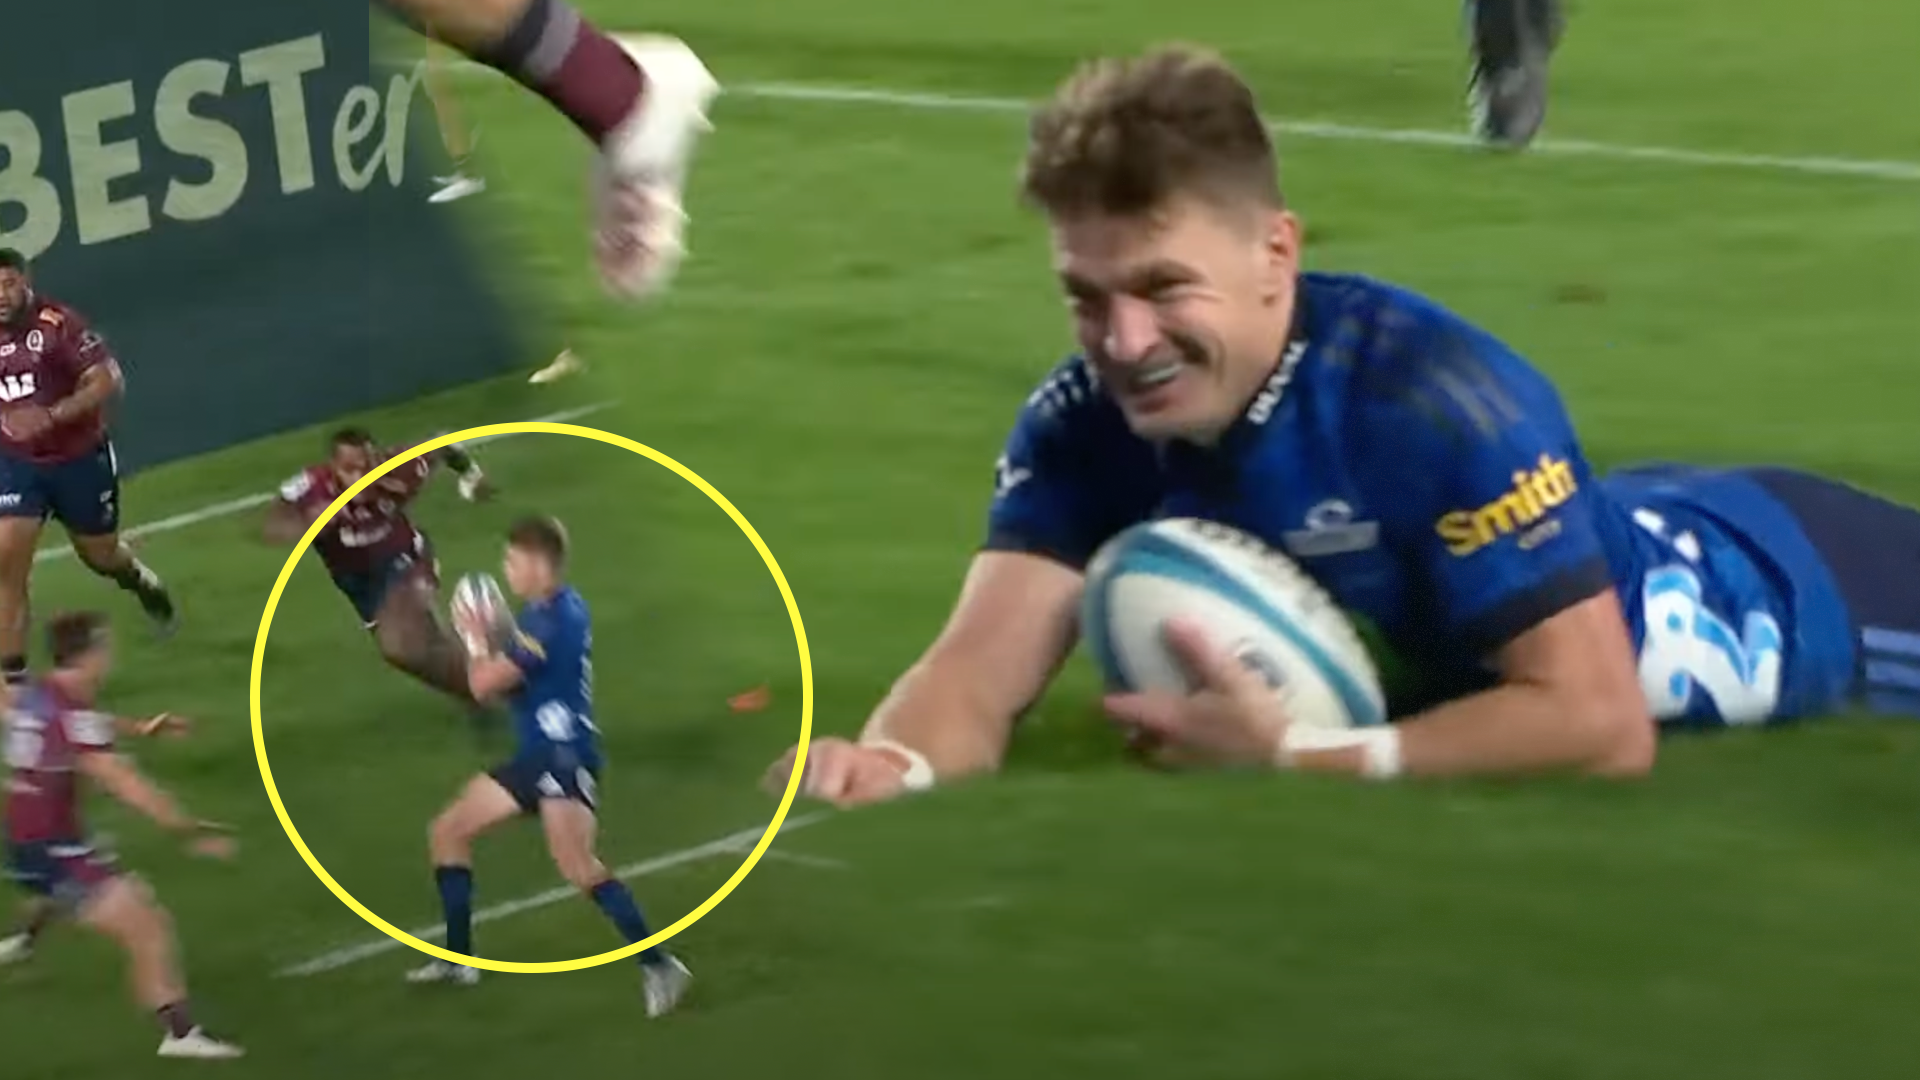 Beauden Barrett treats Reds defence with absolute contempt